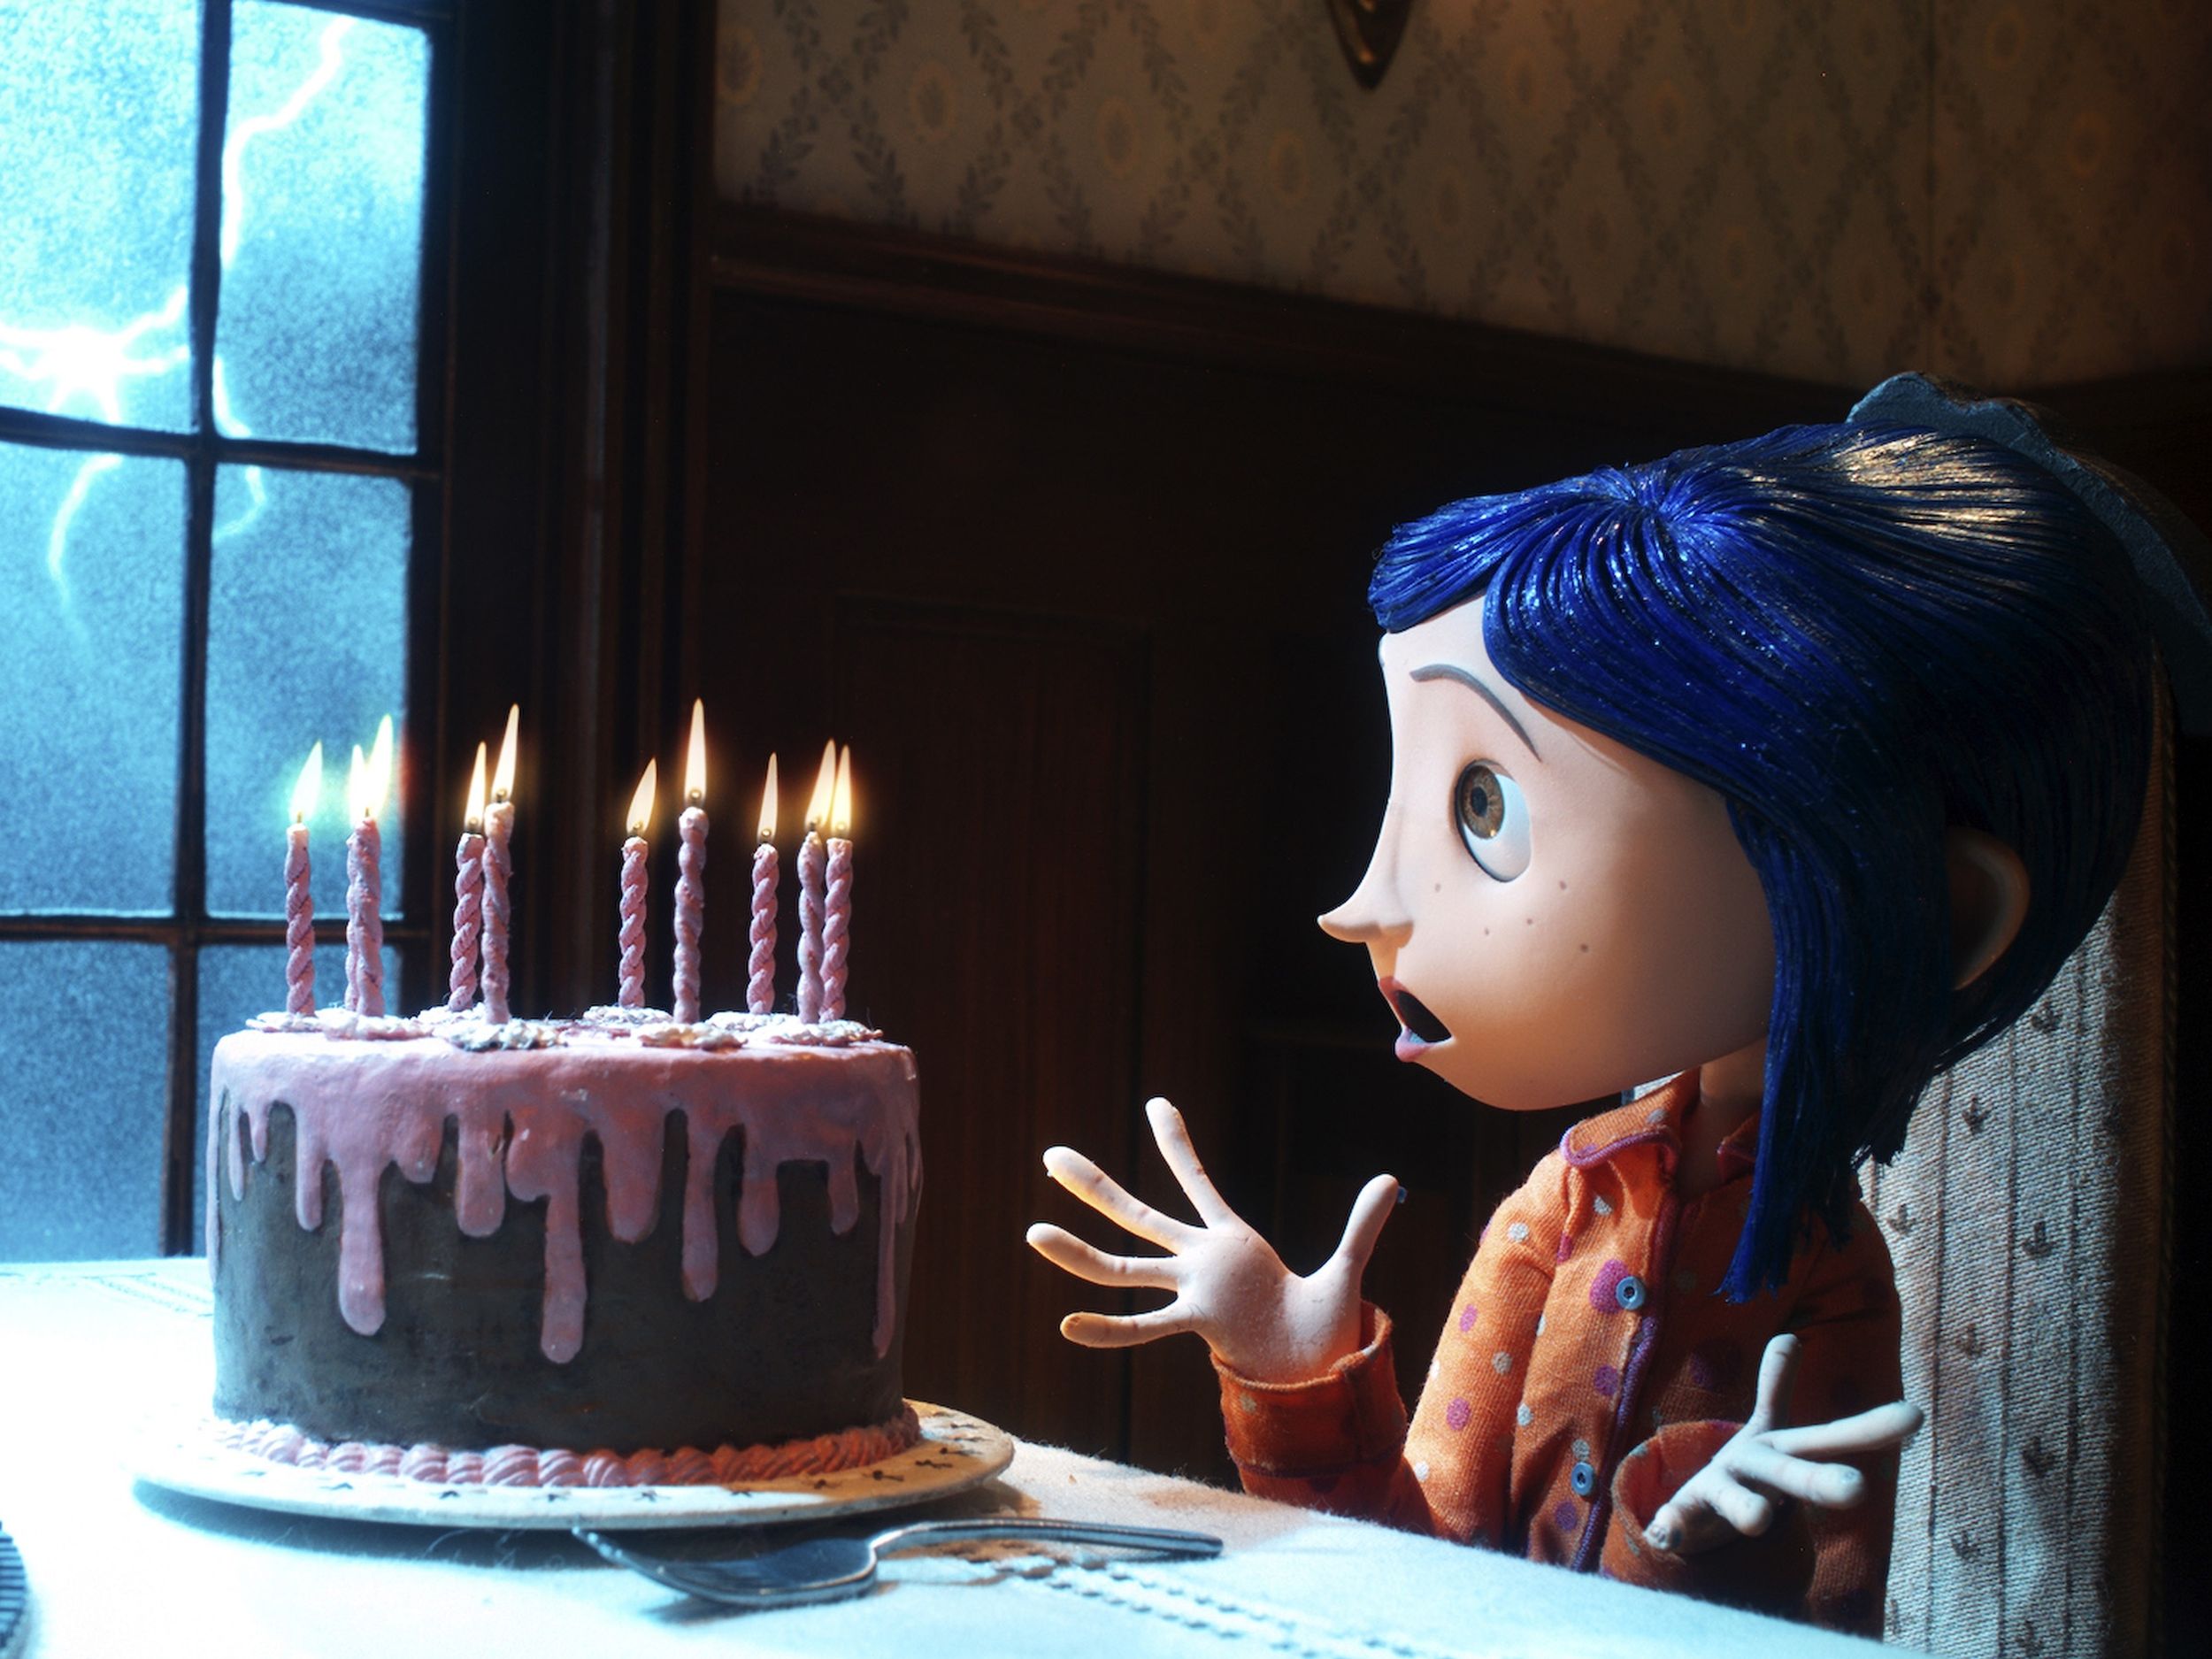 Coraline' embarks on magical adventure